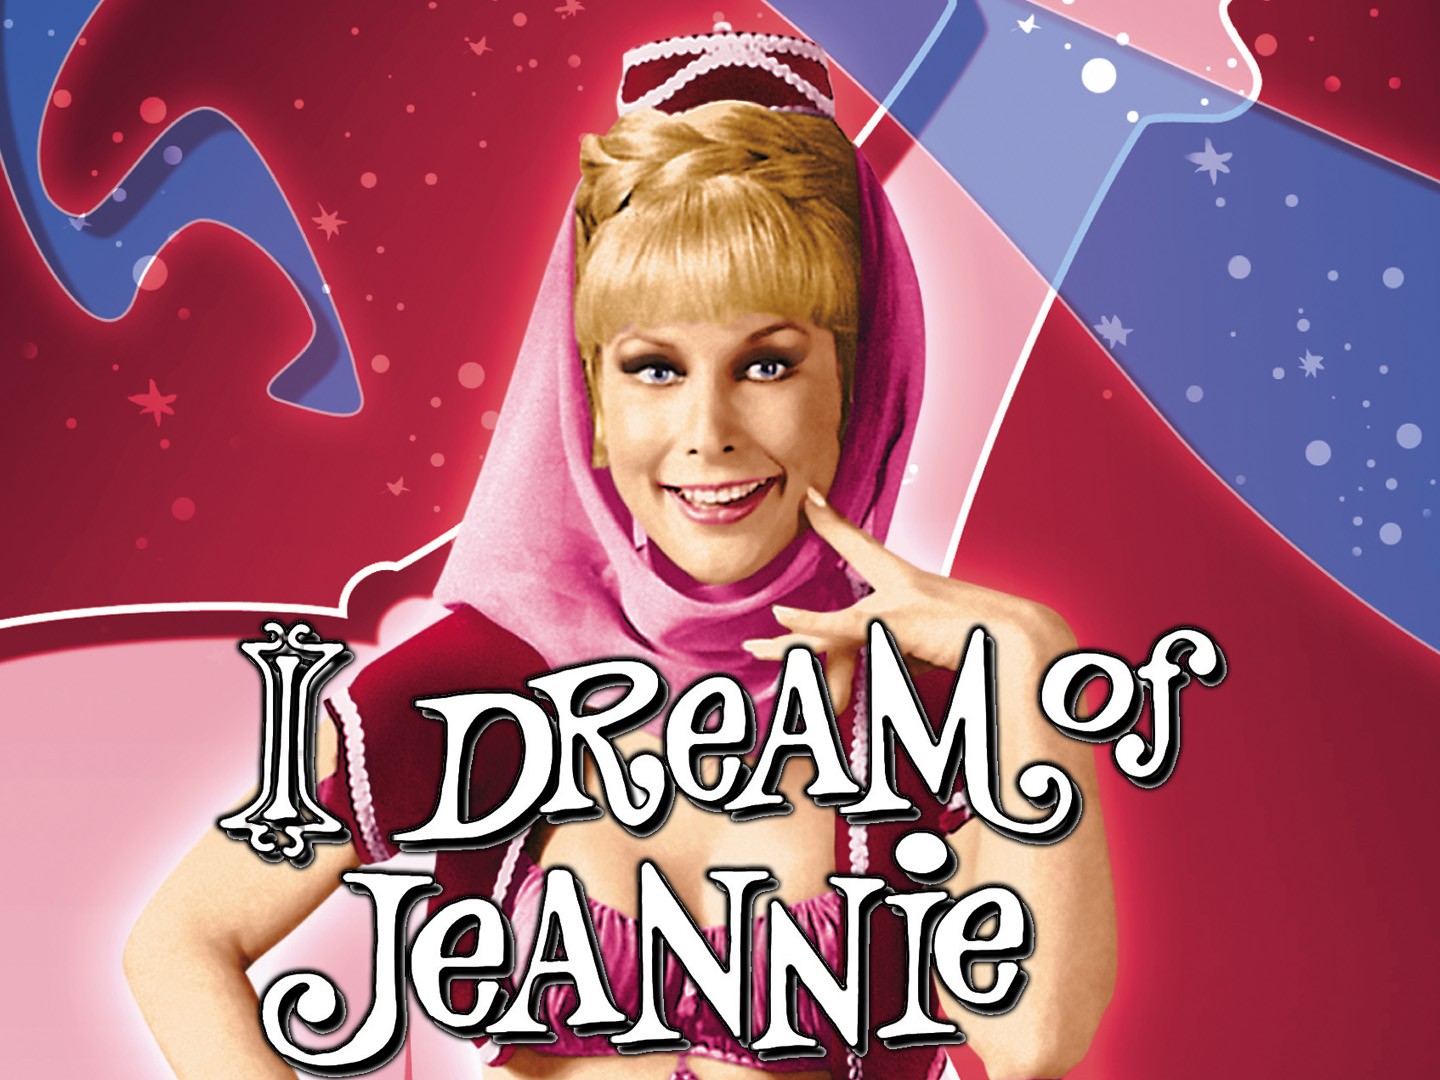 15-i-dream-of-jeannie-facts